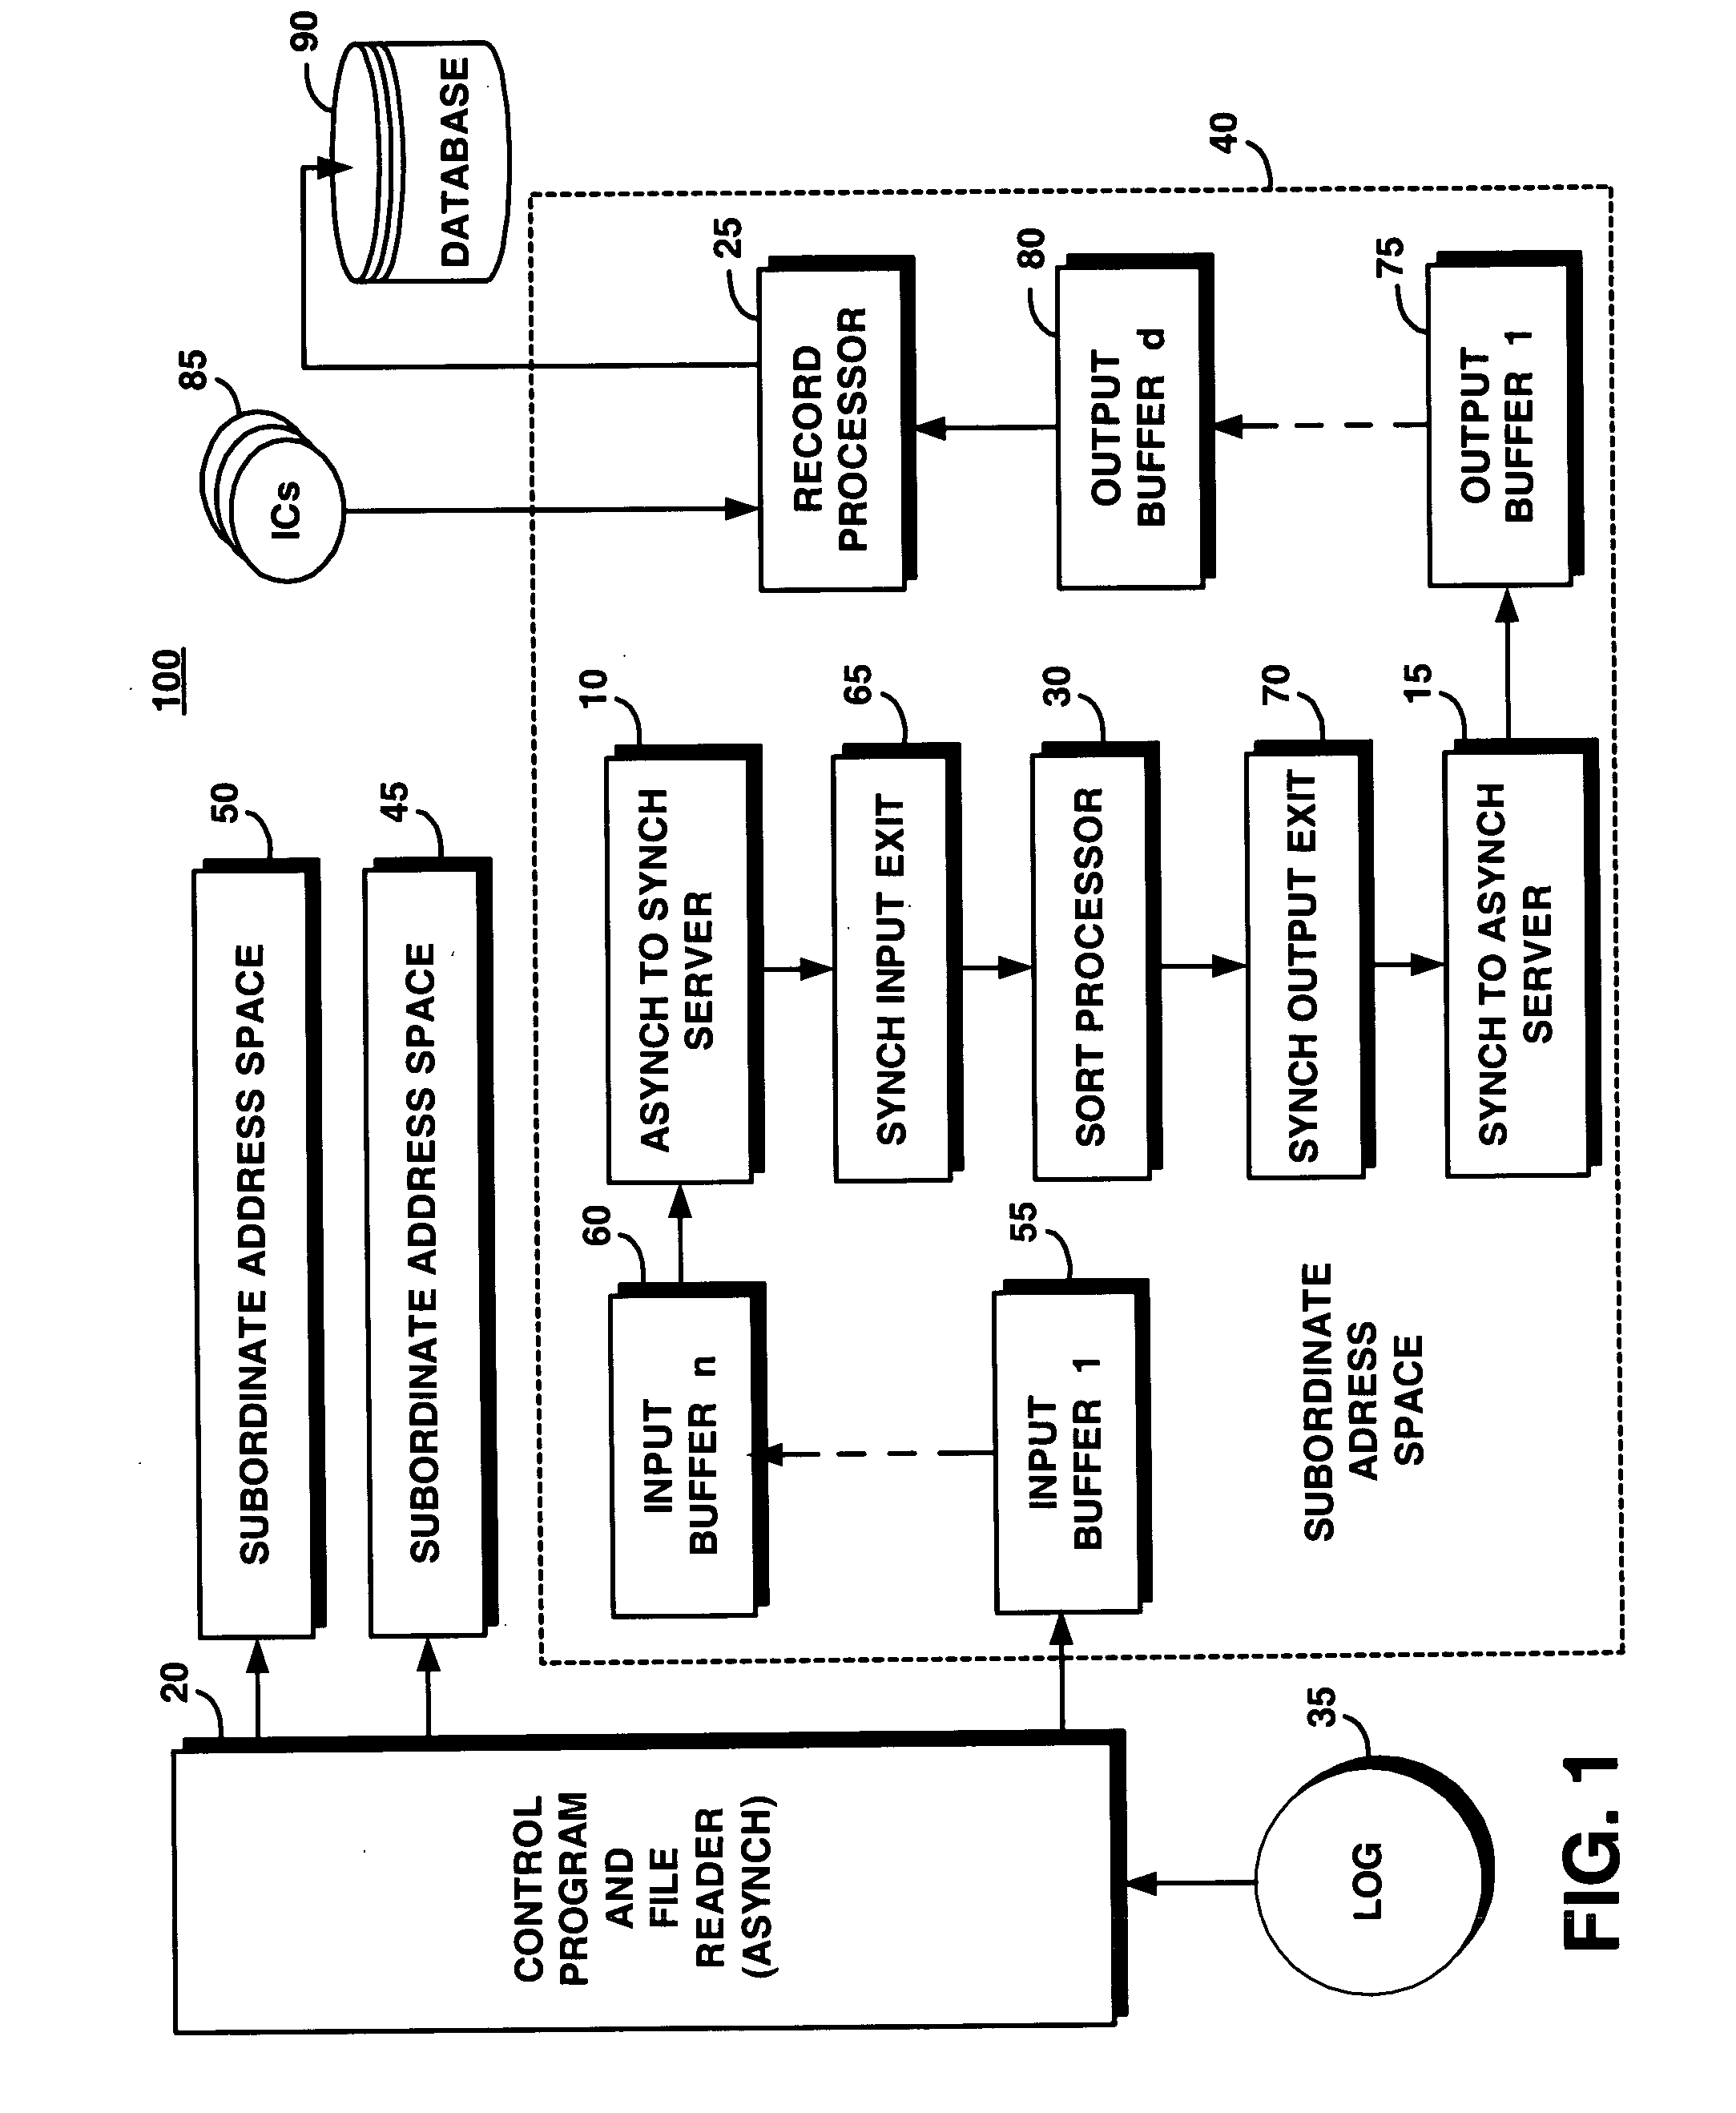 System and method for facilitating data flow between synchronous and asynchronous processes